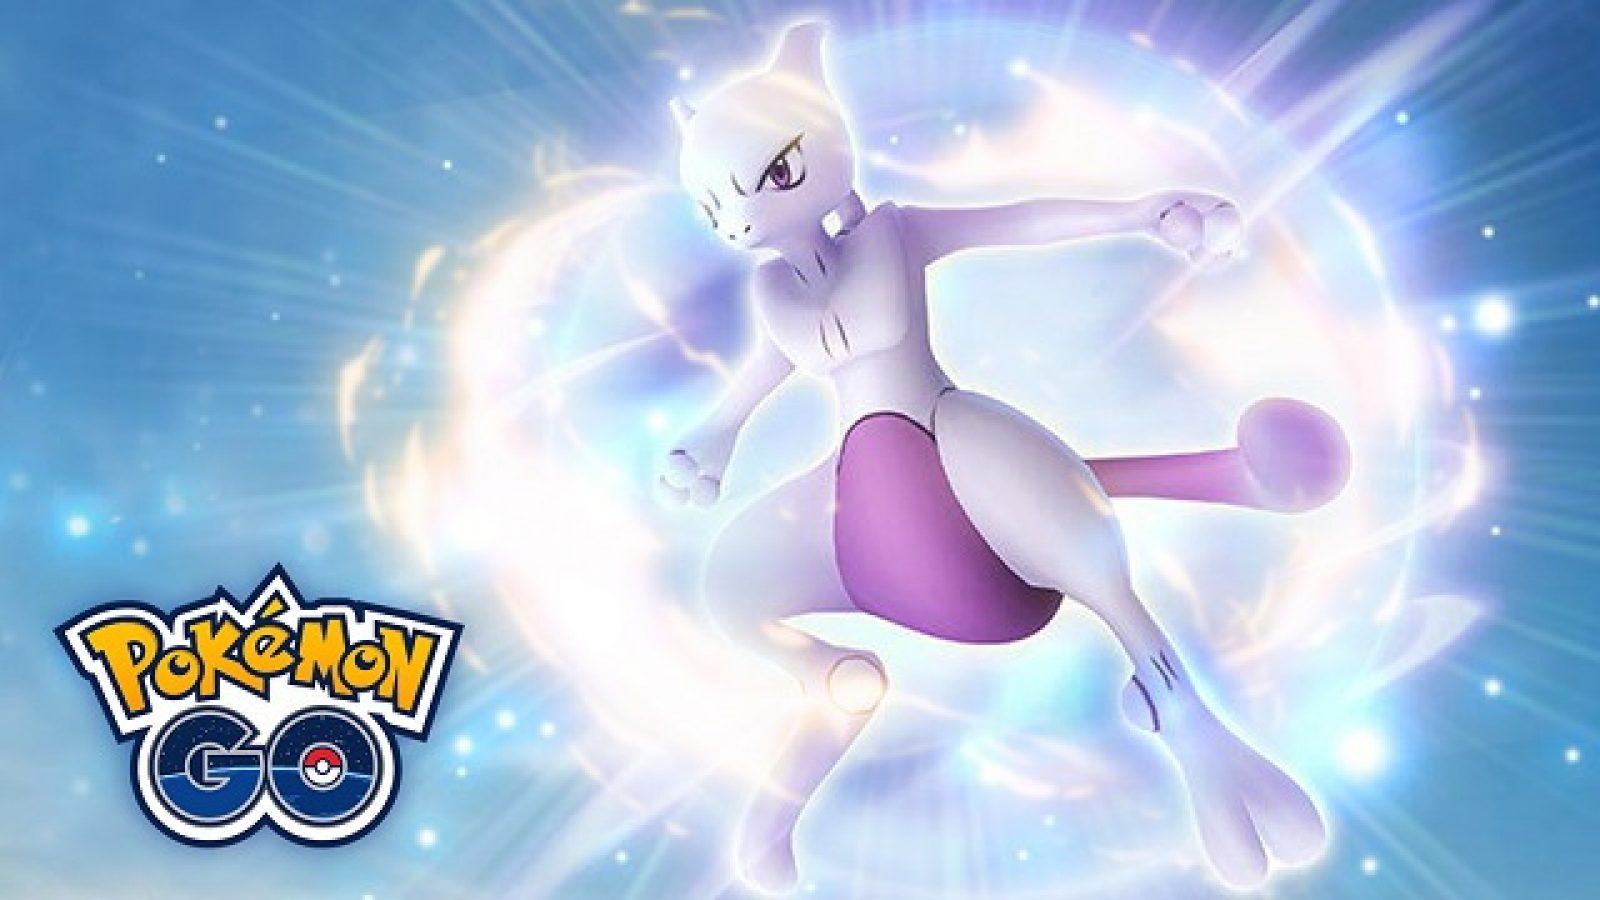 Armored Mewtwo coming to Pokemon Go, datamine suggests